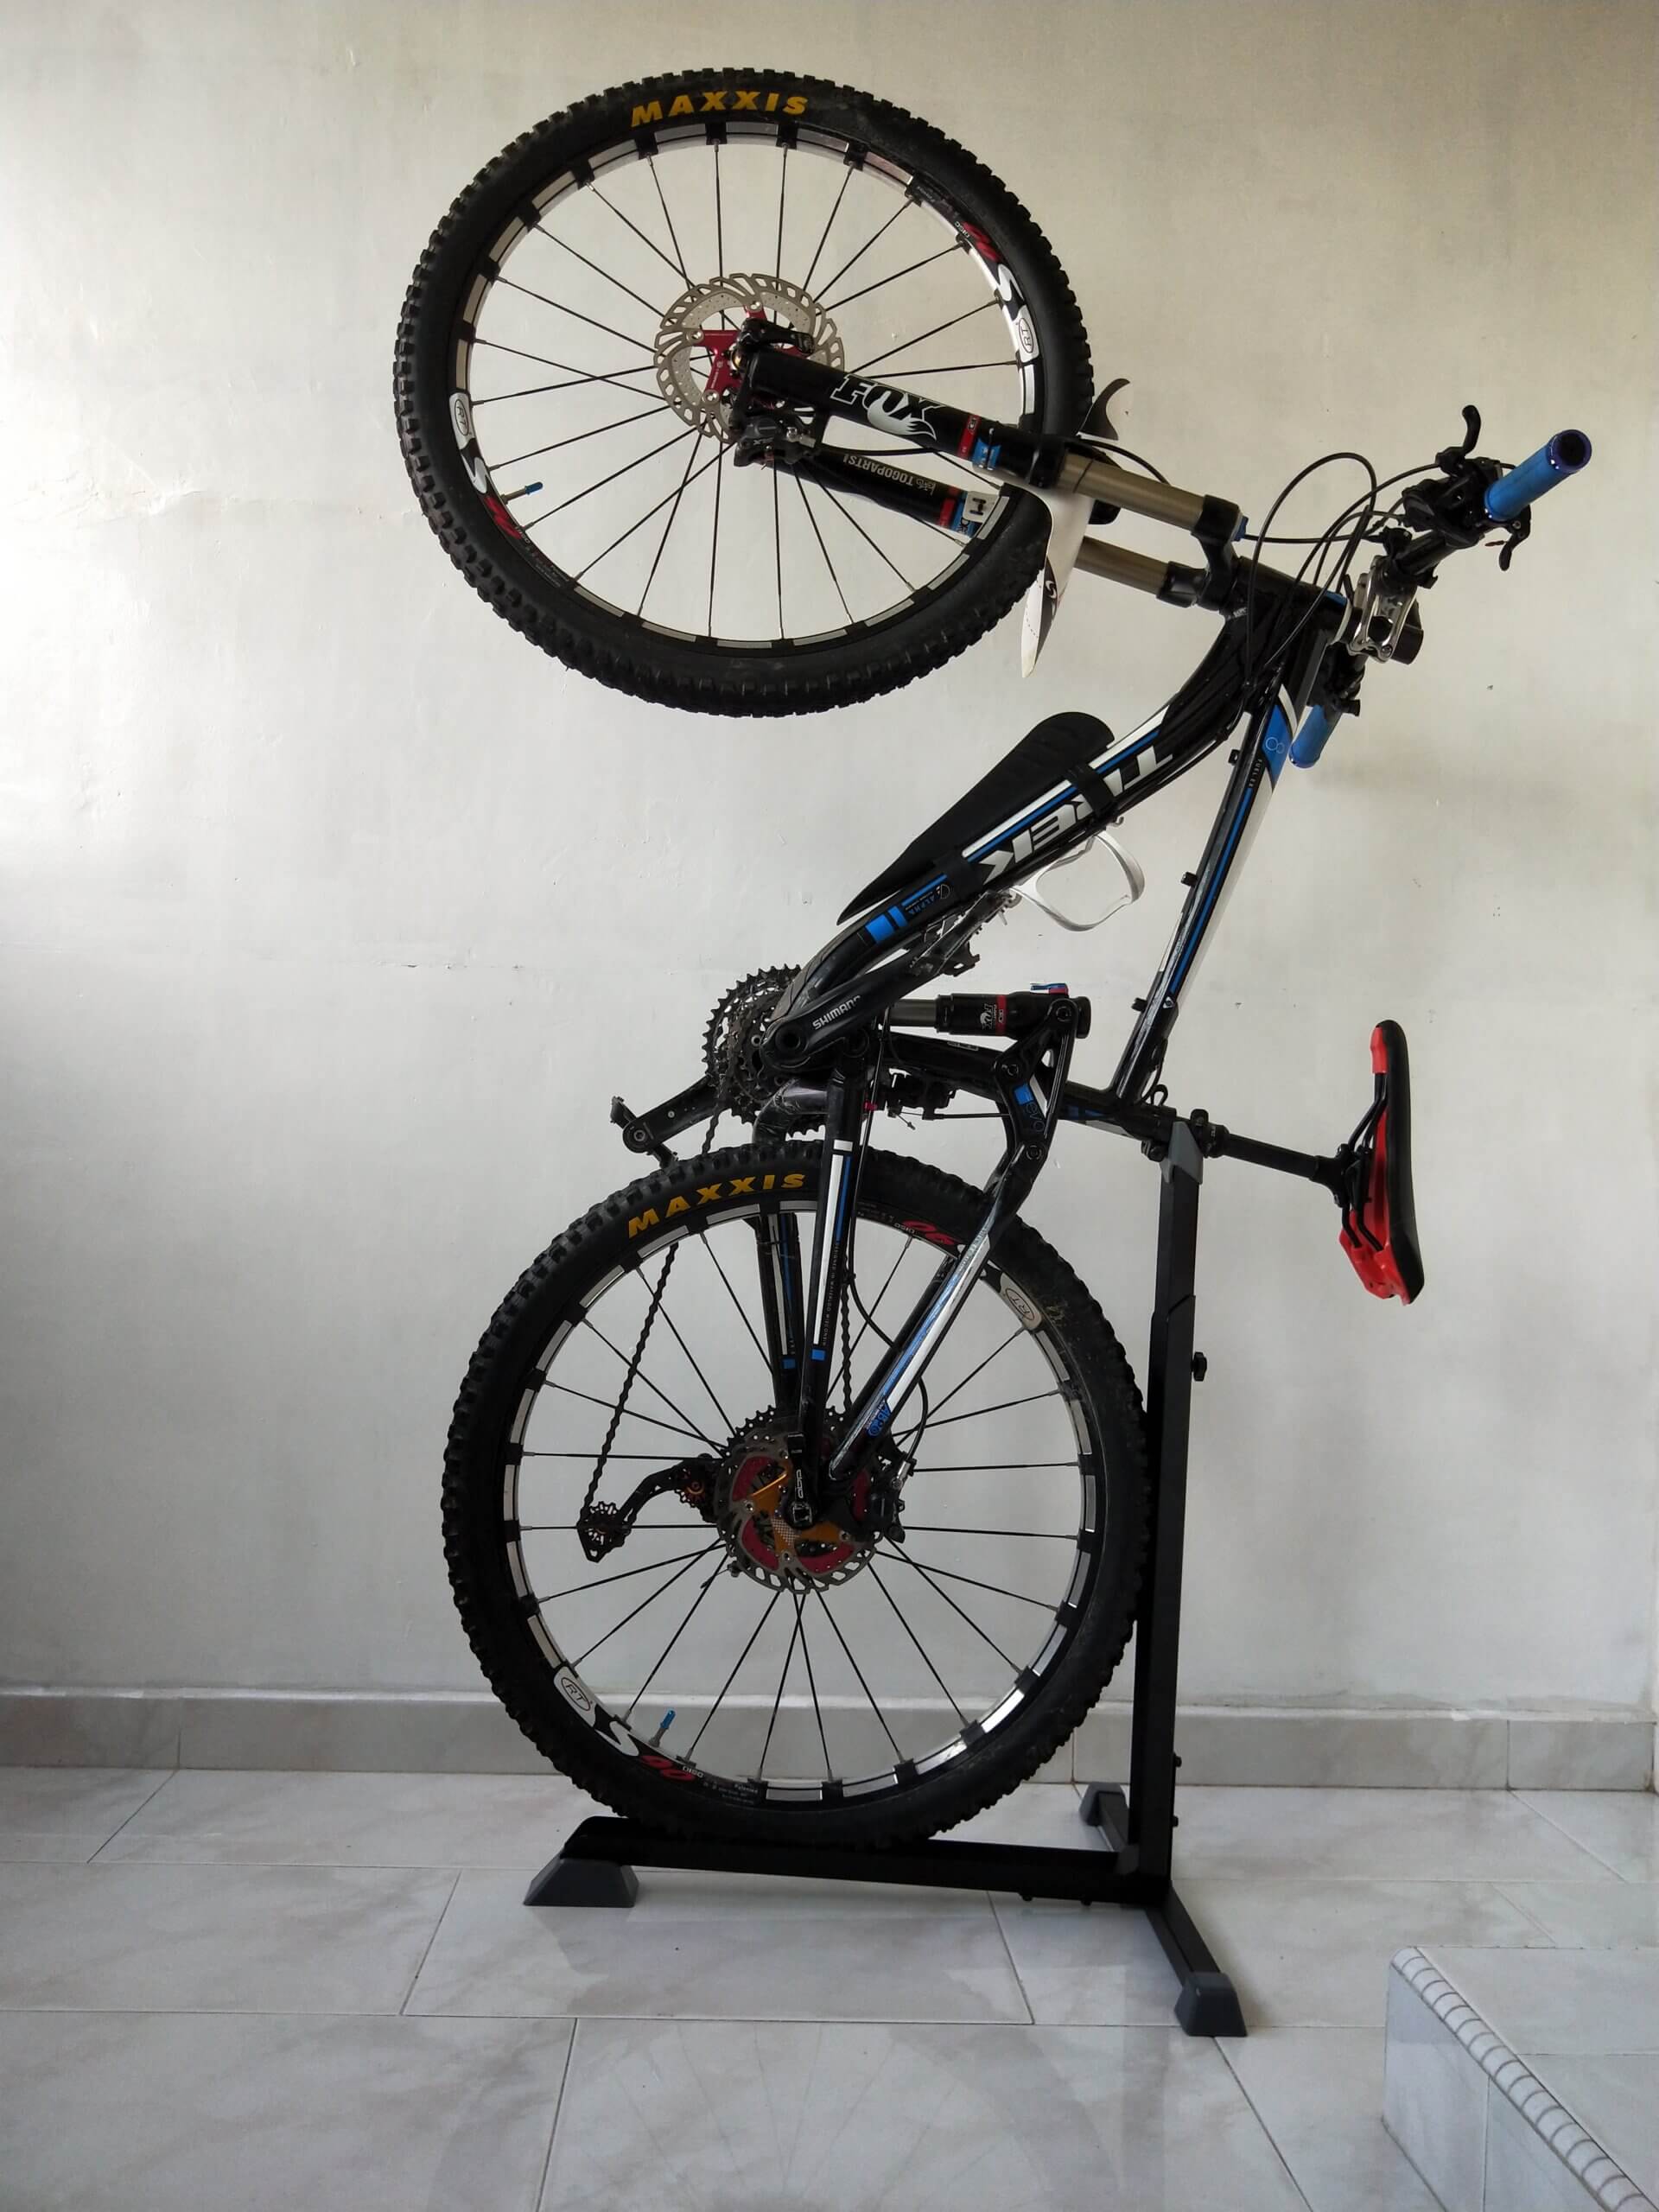 The Instant Upright Bike Stand